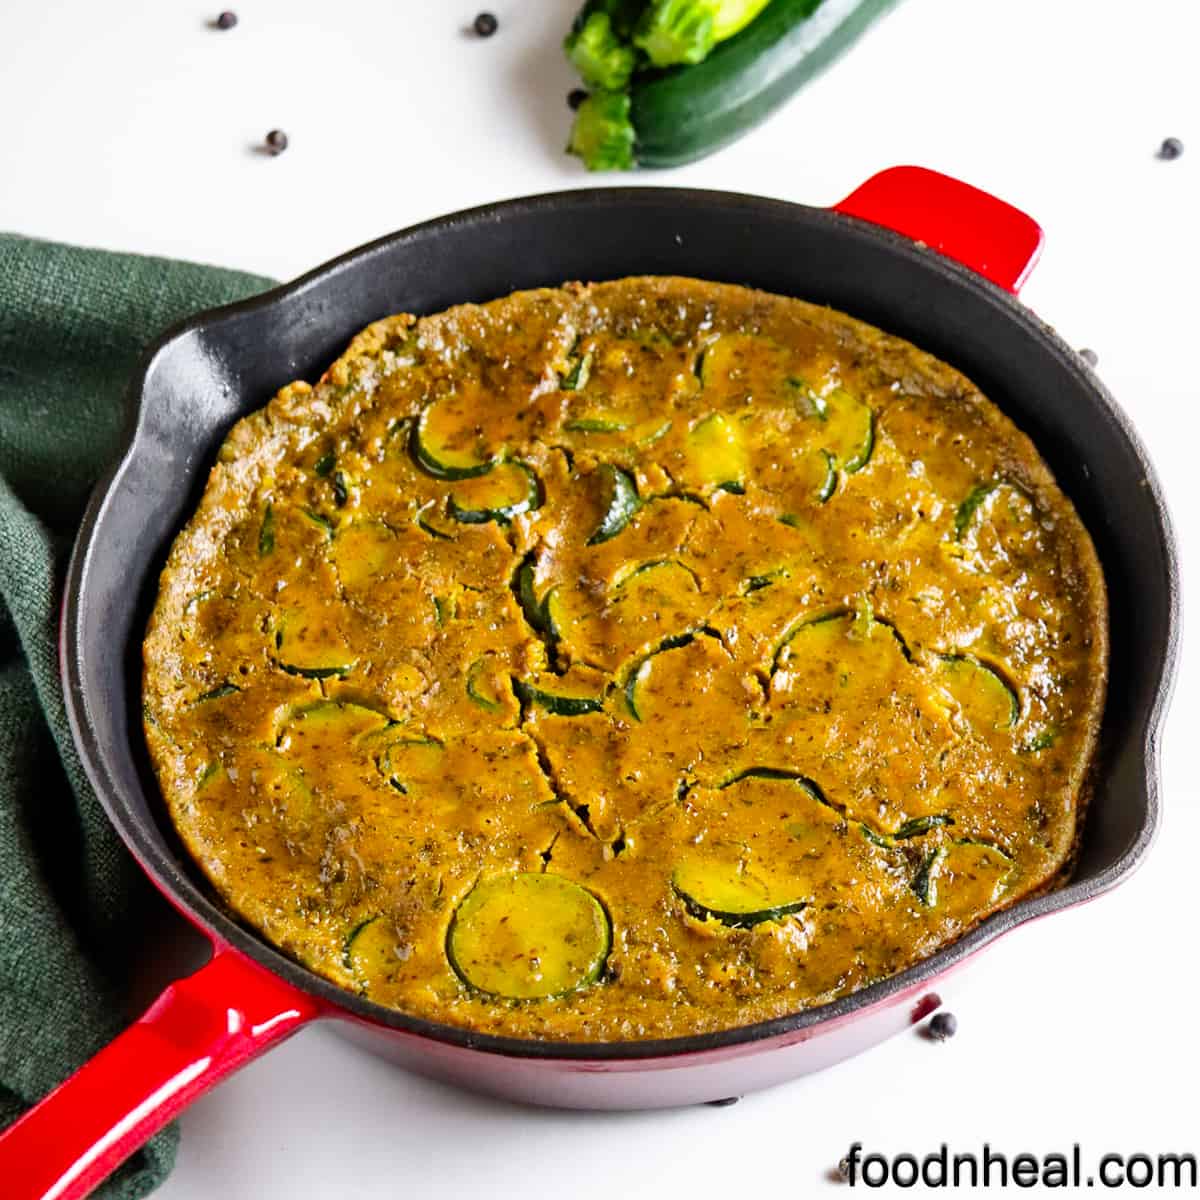 Enjoy this easy and delicious vegan zucchini frittata